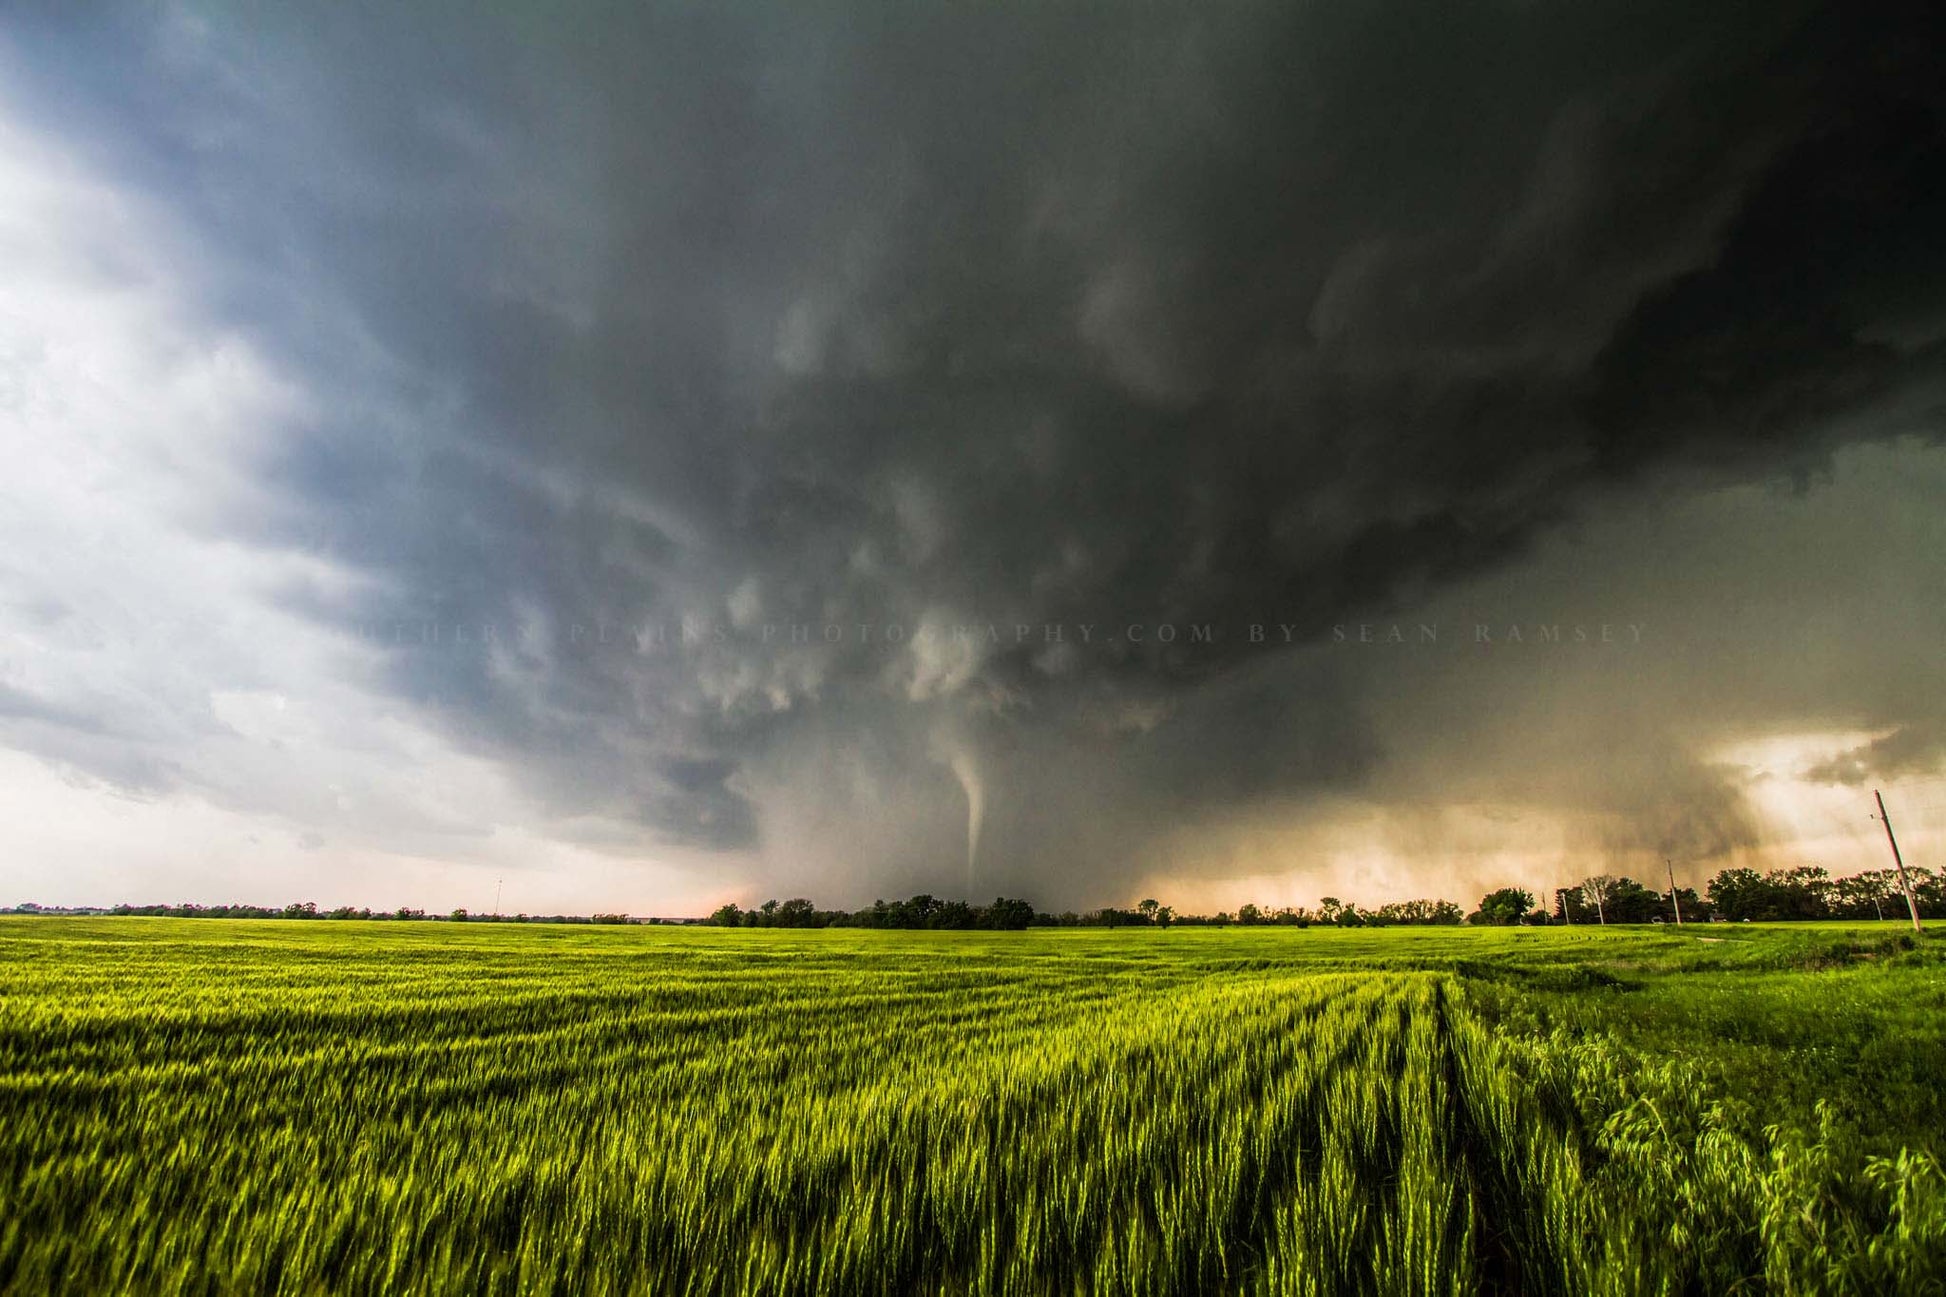 Storm photography print of a tornado emerging from rain over a wheat field on a stormy spring day in Kansas by Sean Ramsey of Southern Plains Photography.